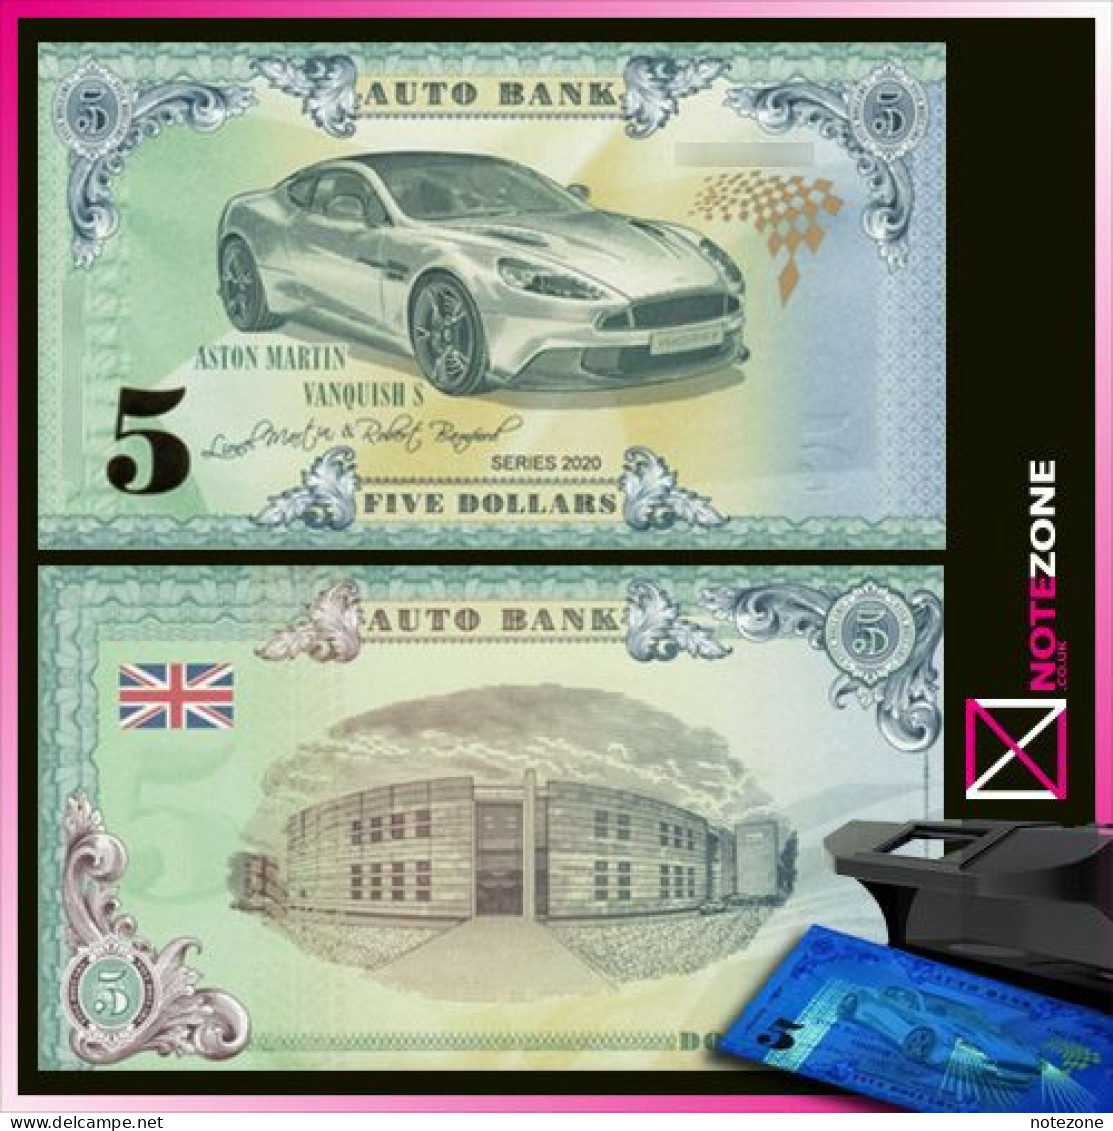 Auto Bank $5 Aston Martin Vanqush S Fantasy Test Note Private - Collections